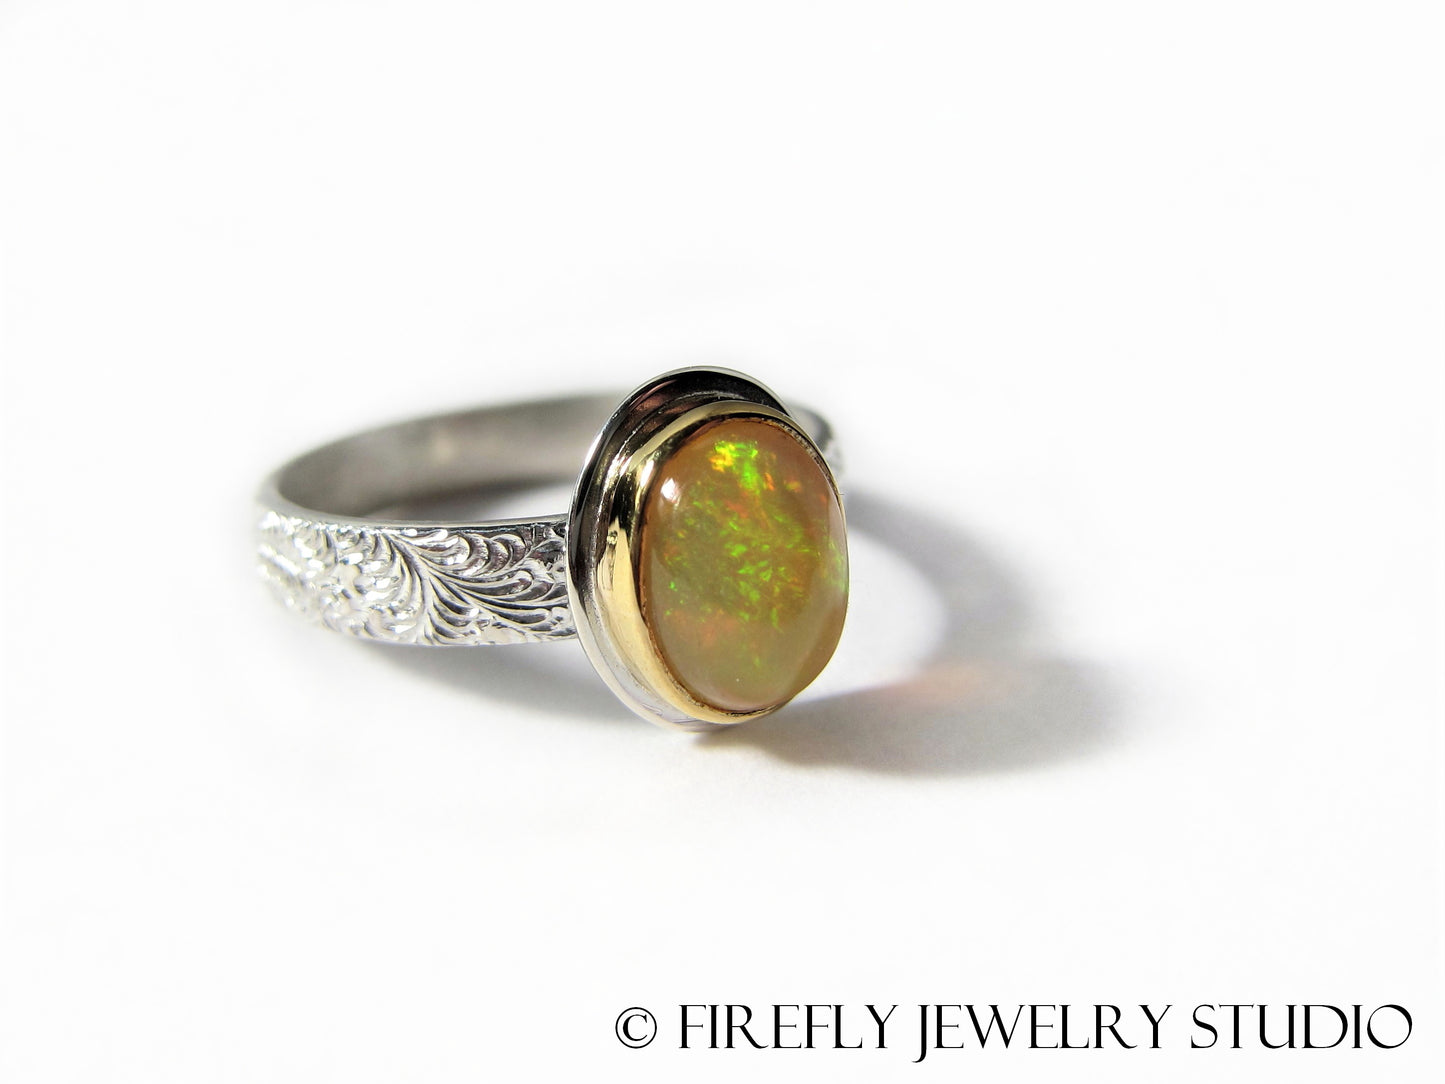 Ethiopian Opal Ring in 24k Gold and Sterling. Size 6.5 - Firefly Jewelry Studio